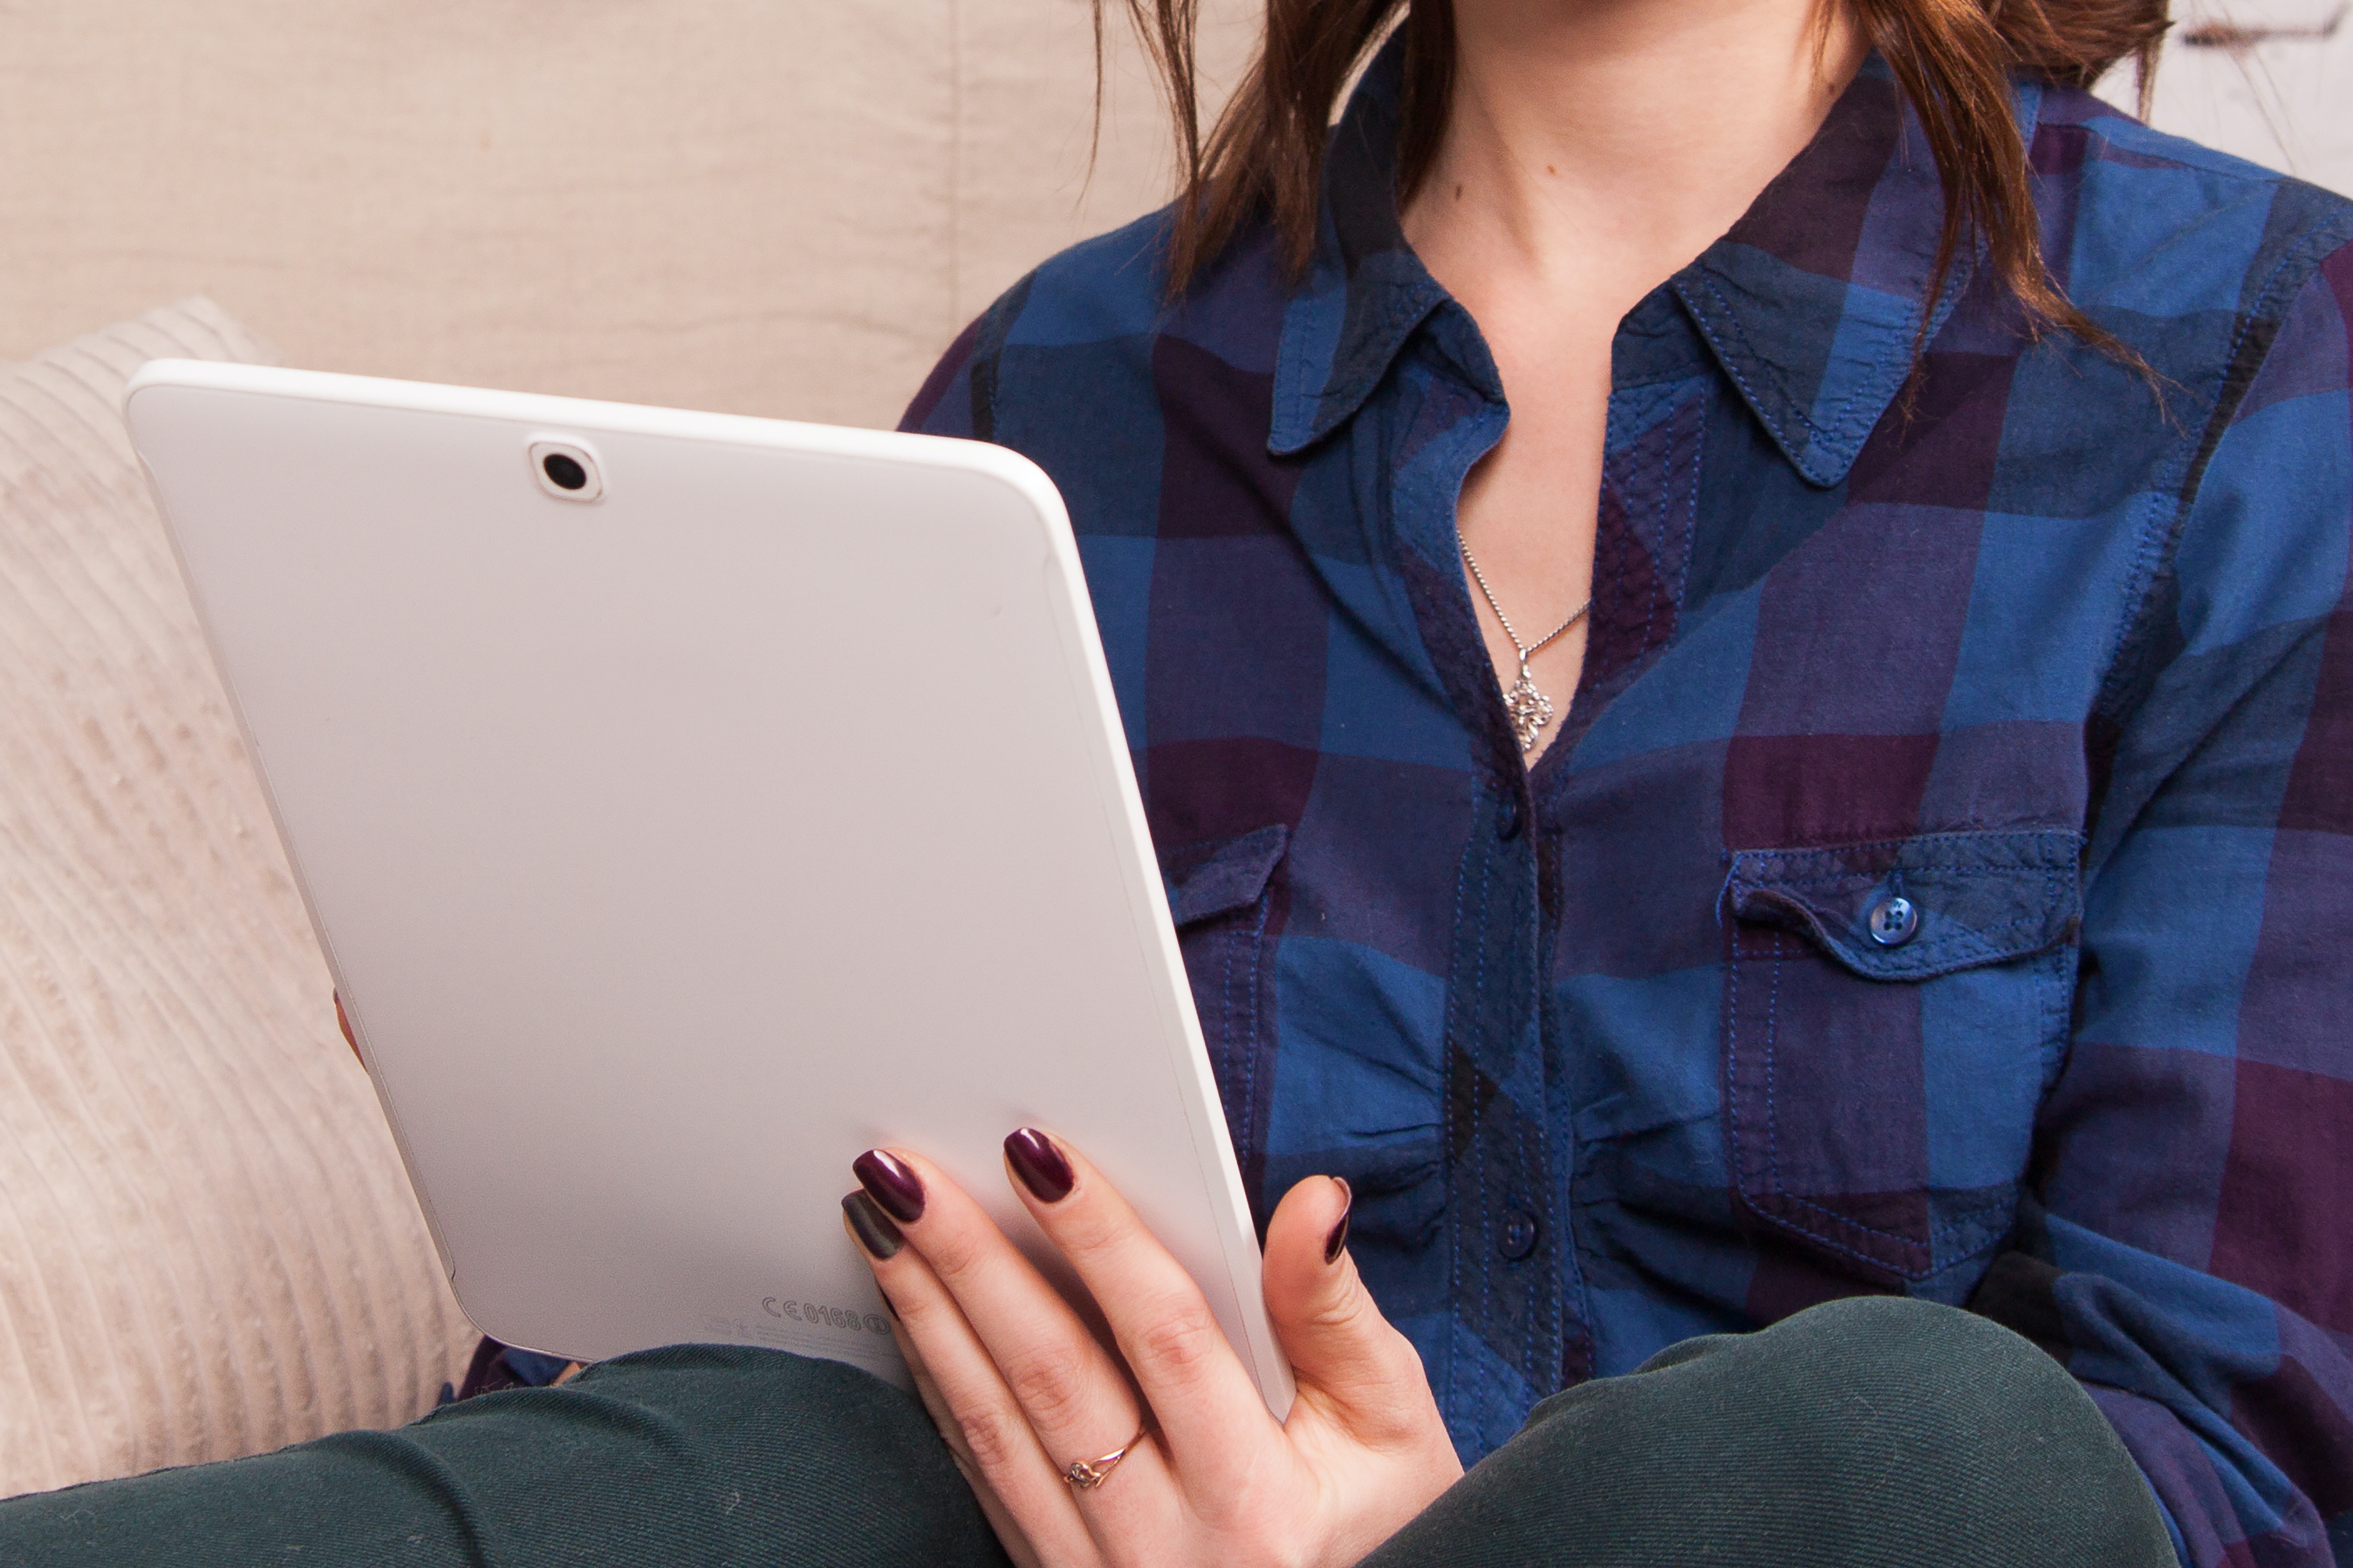 A woman in a buttoned blue shirt using a tablet computer